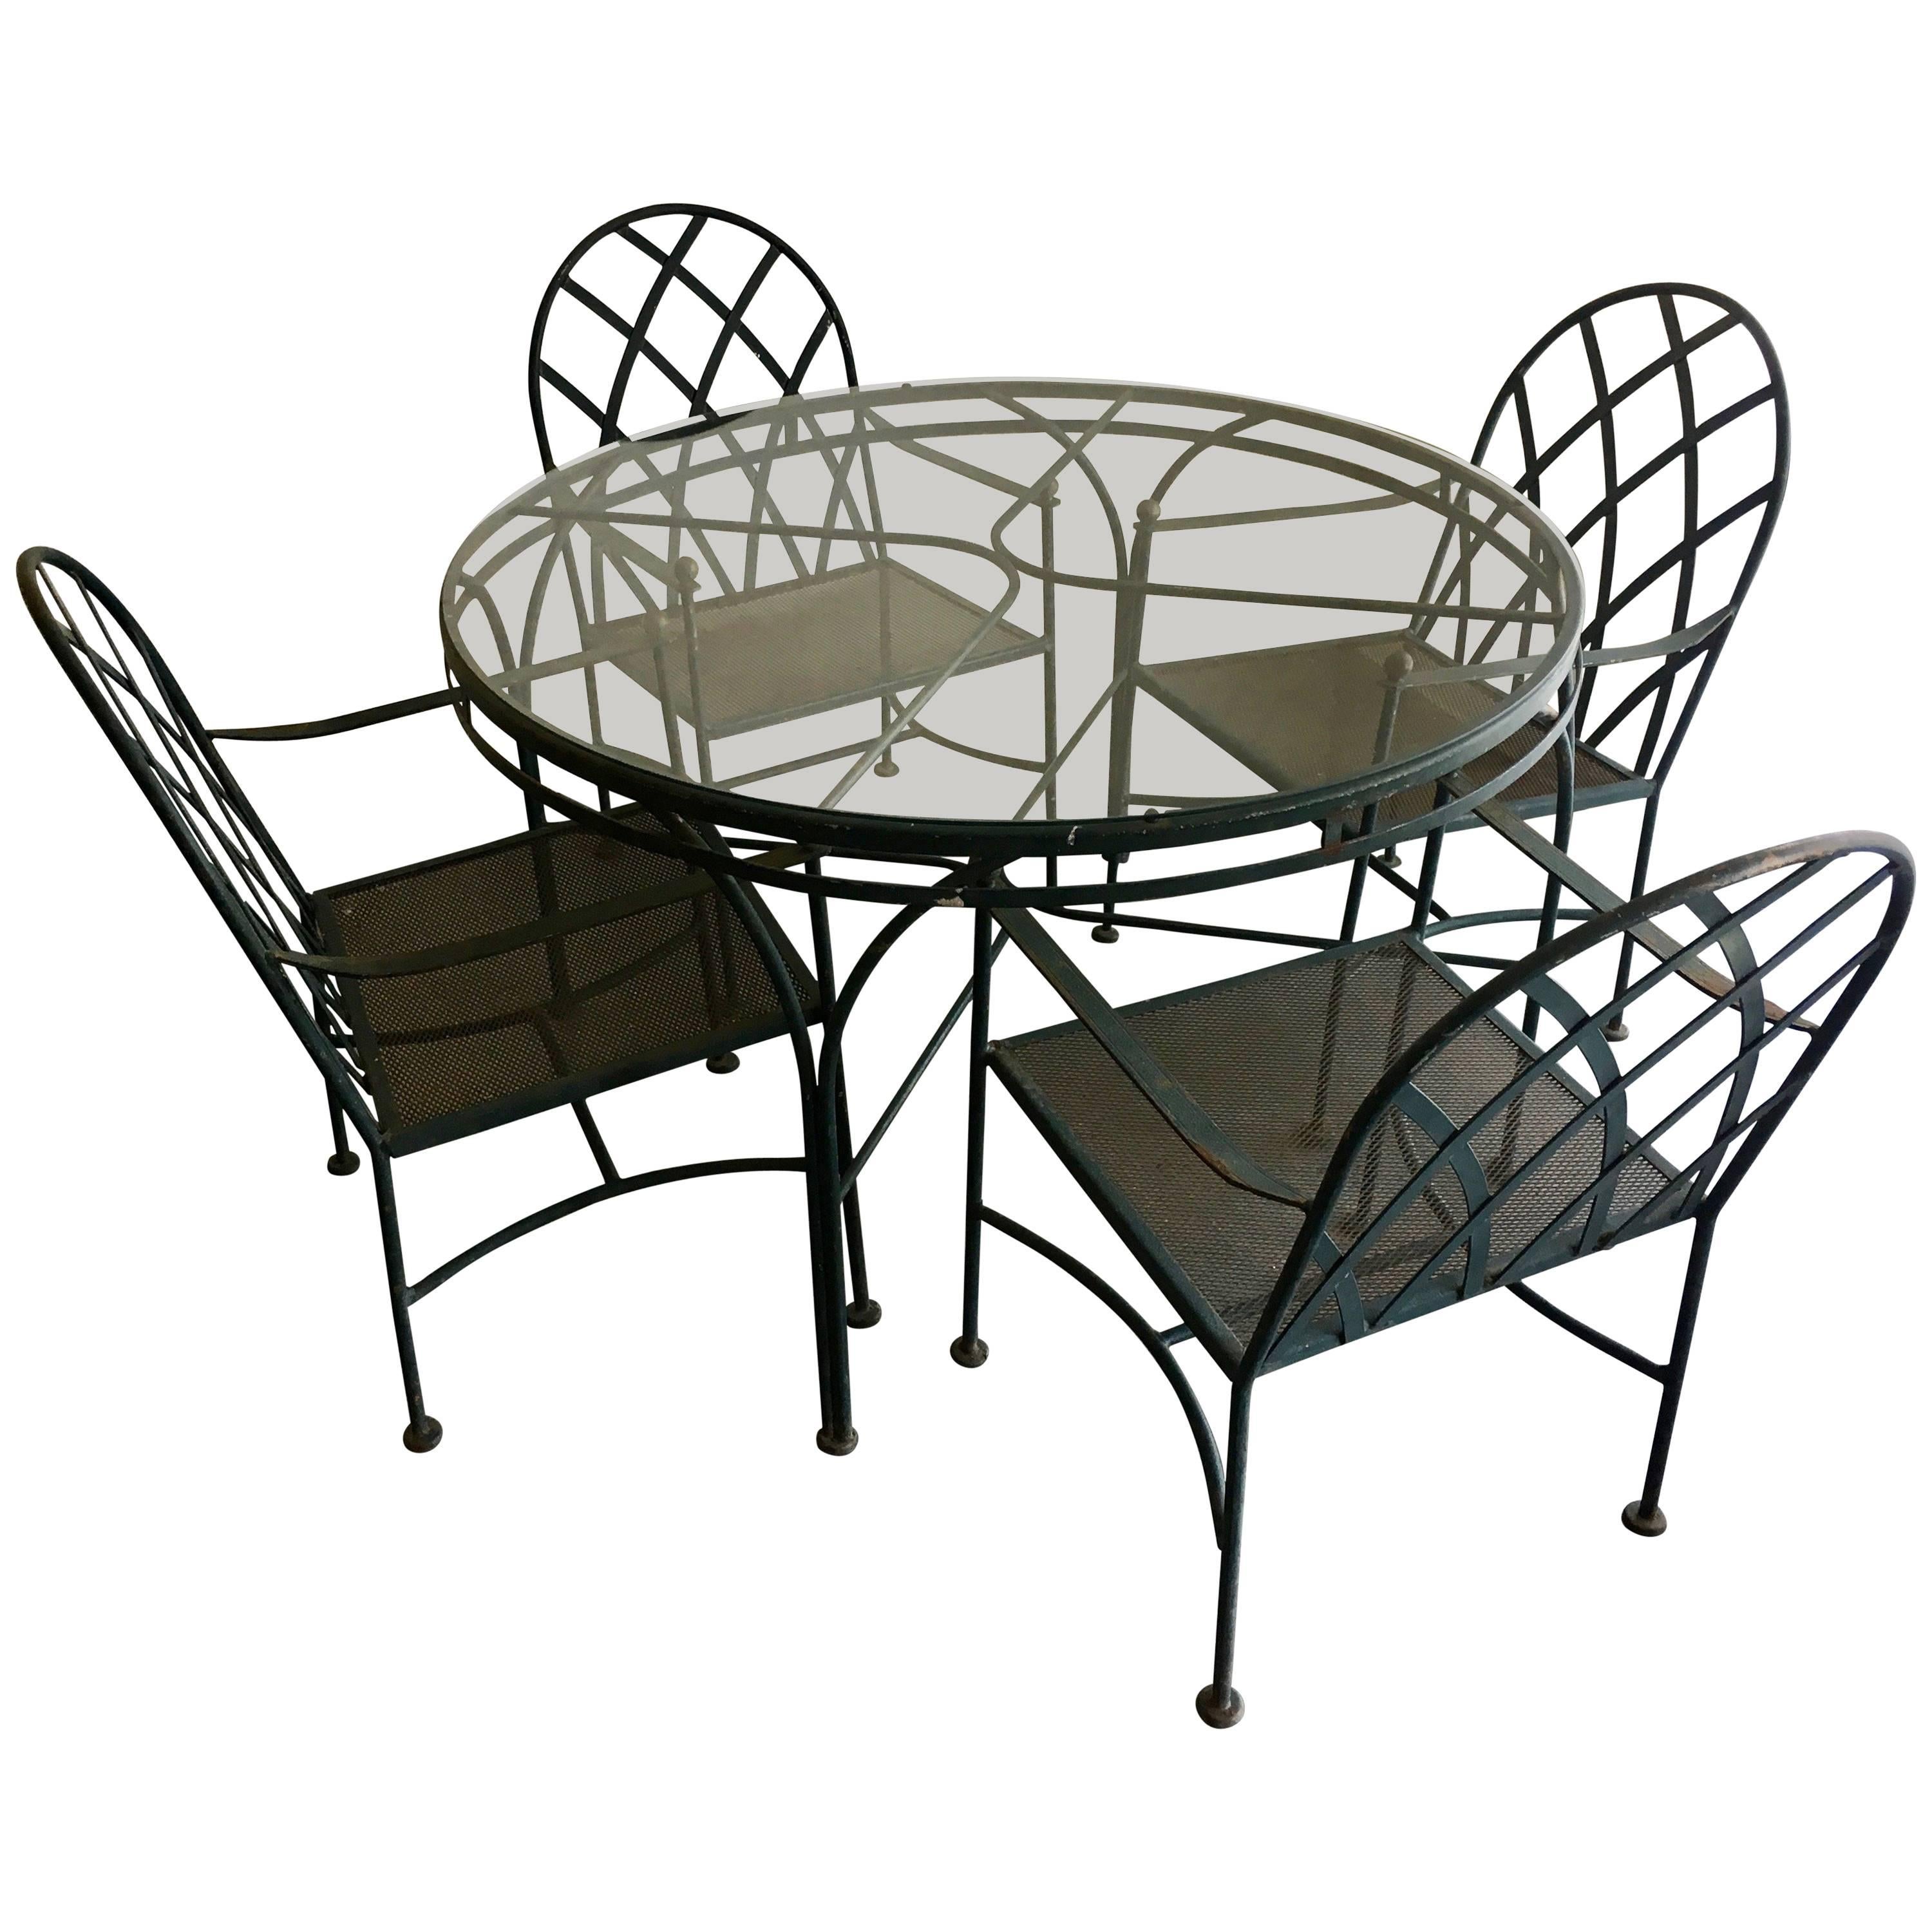 TiTa-Dong 3-Piece Wrought Iron Patio Furniture Set,Retro Antique Tulip Design Copper European Style Weather Resistant Rust-Resistant Table and Chairs Set 